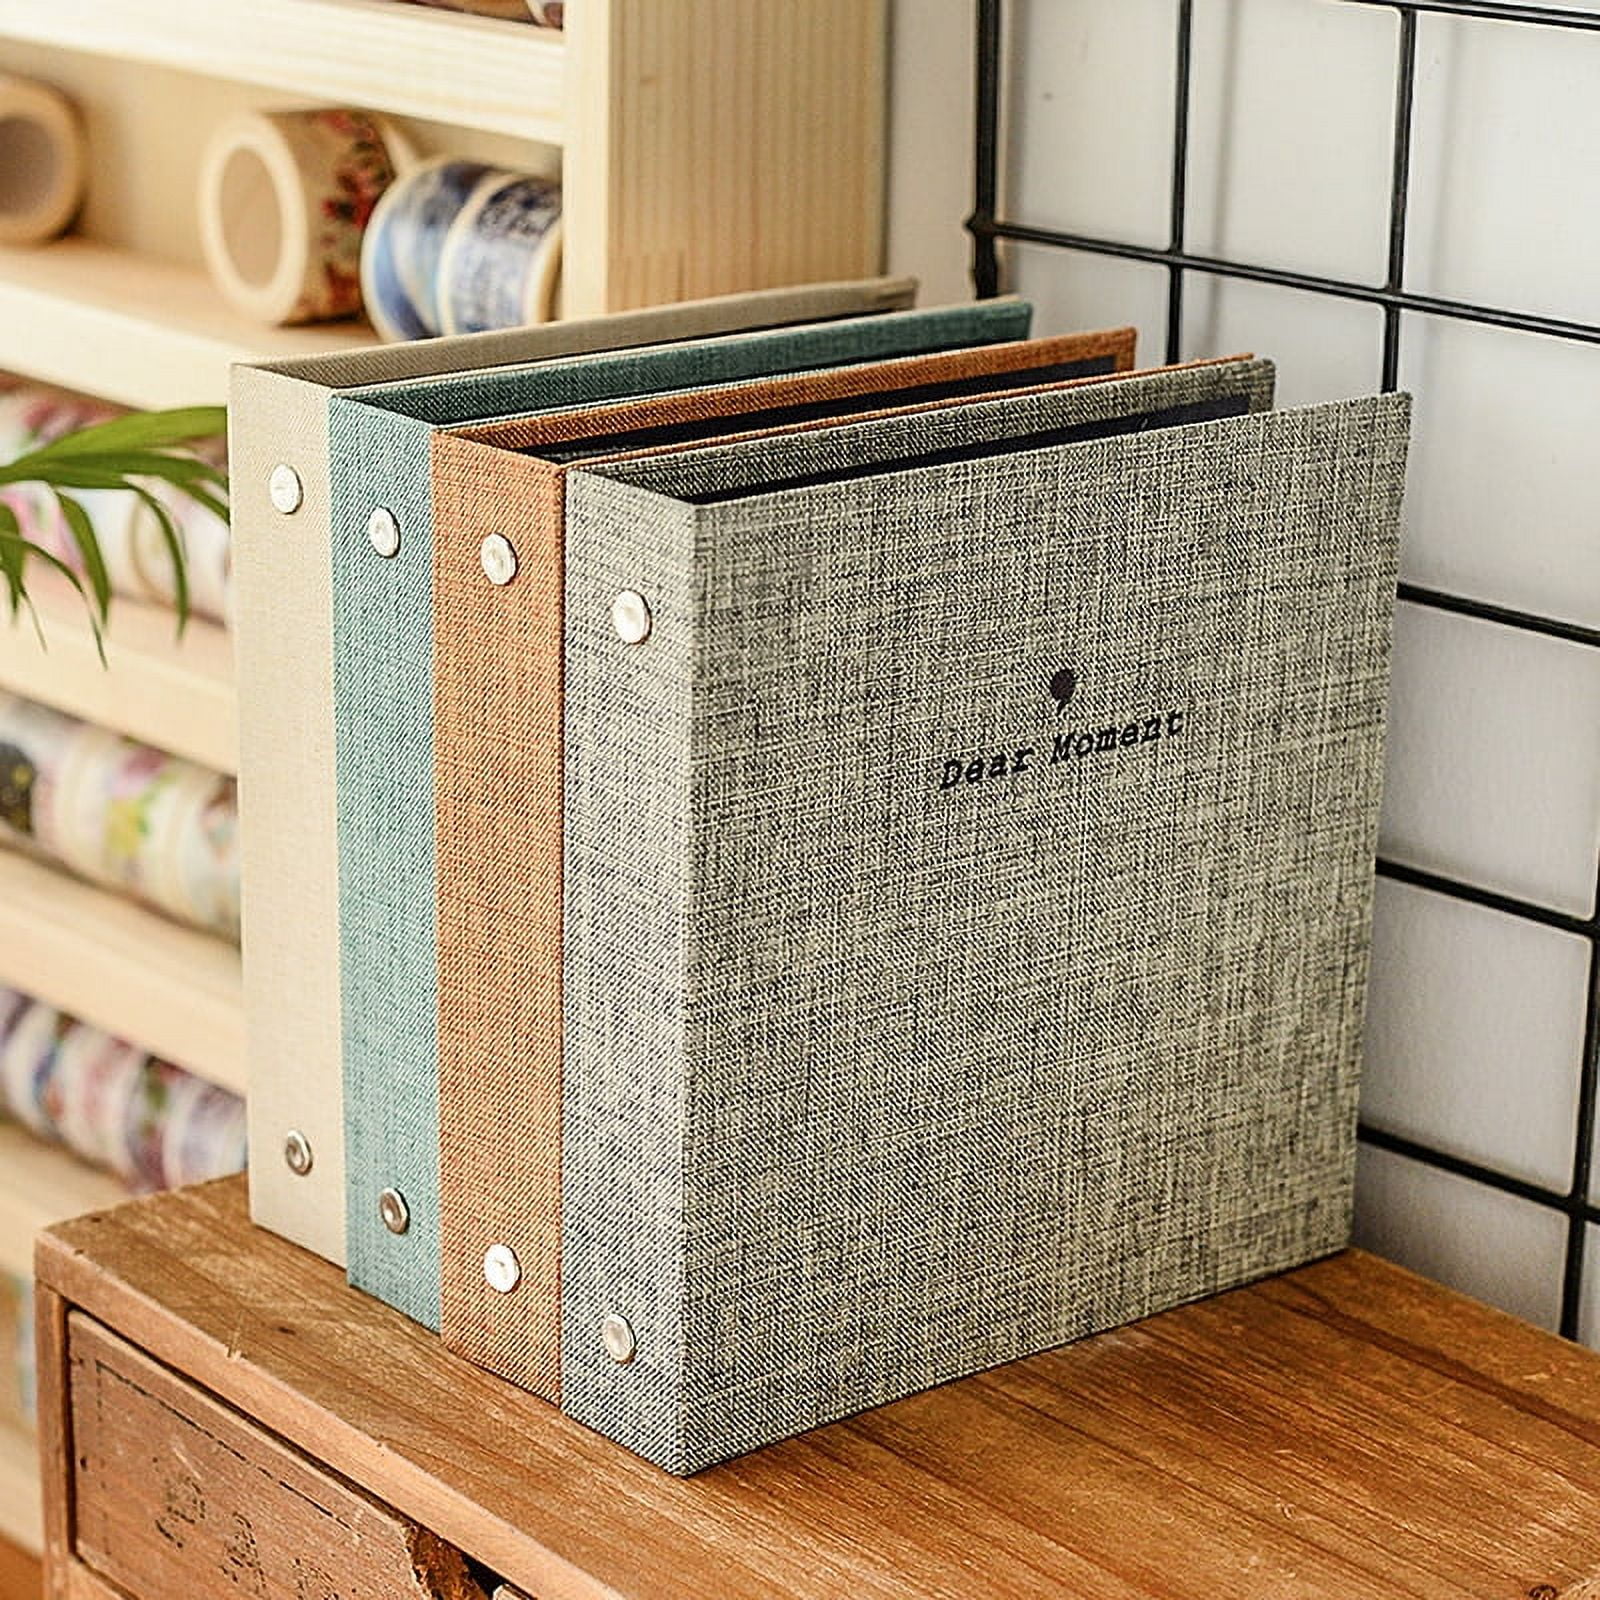 Cow Print Loose Leaf Album Collection Craft Organizers And Storage Cabinet